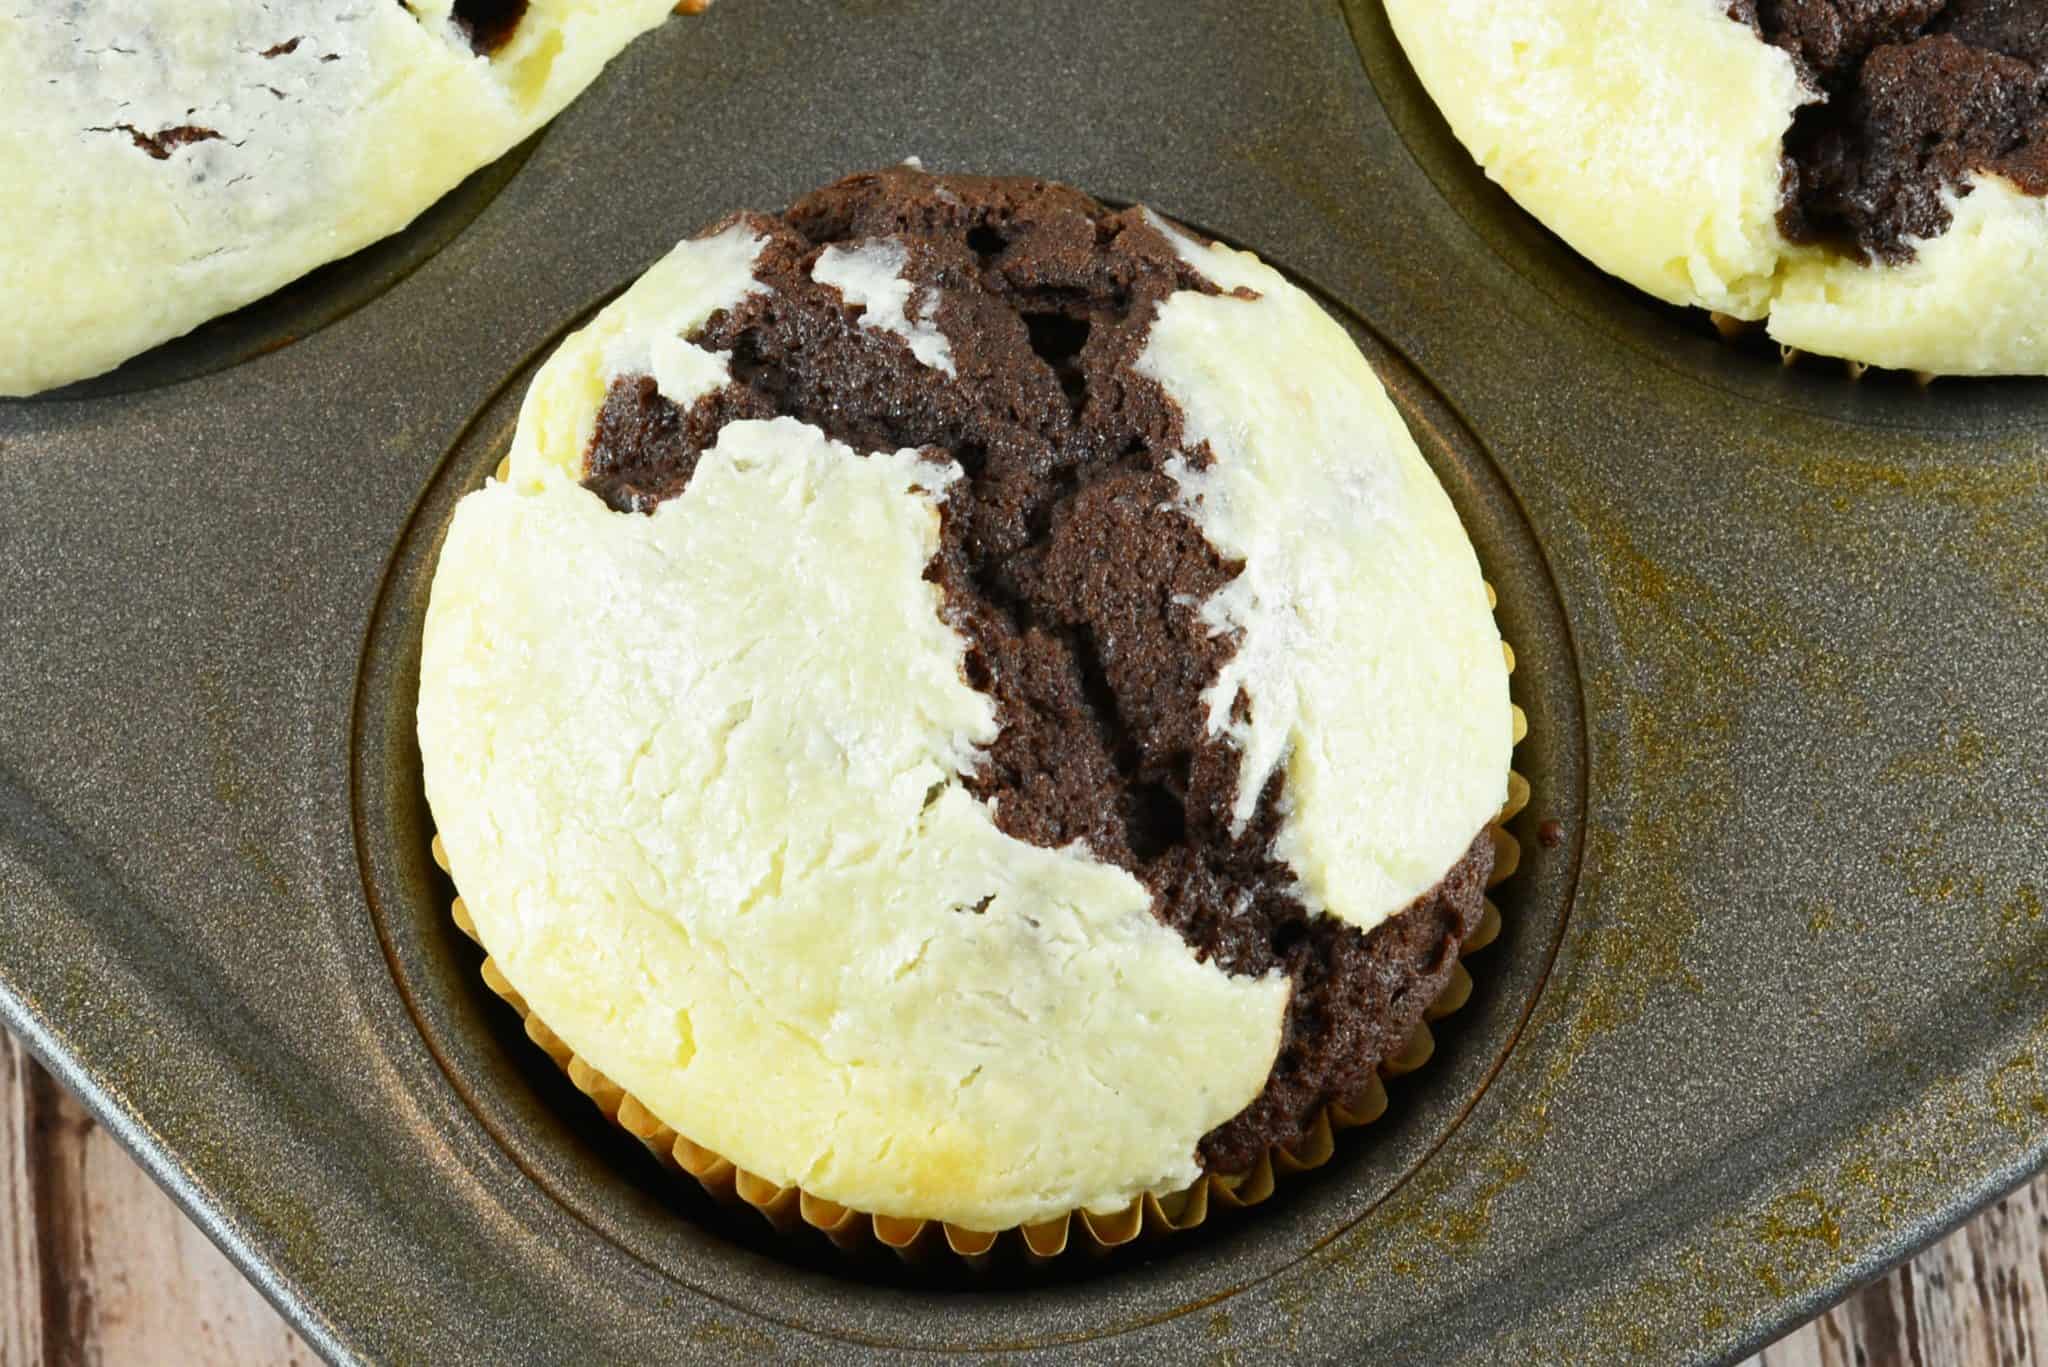 Black bottom cupcakes are a delicious combination of chocolate cupcake bottom and vanilla cream cheese filling. Easy to make and so tasty! #blackbottomcupcakes #blackbottommuffins #creamcheesecupcakes www.savoryexperiments.com